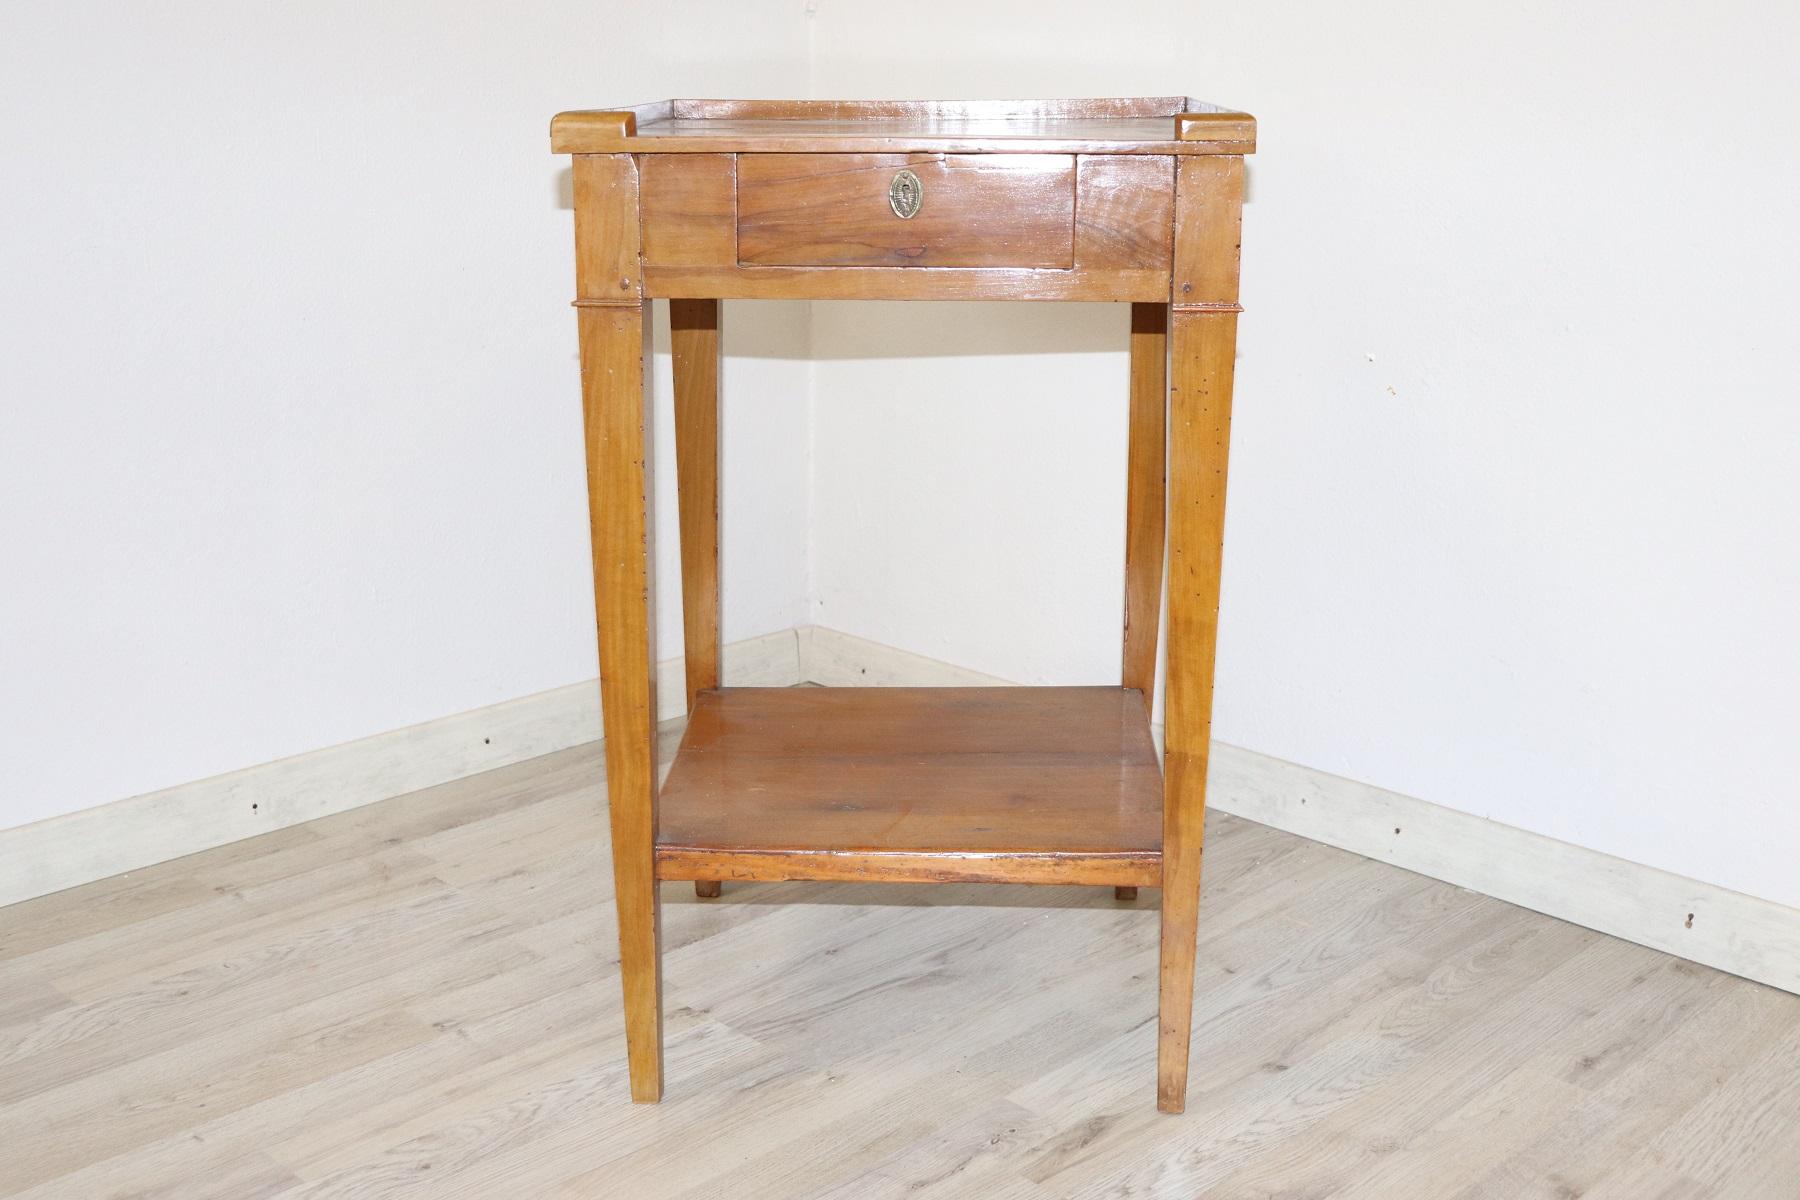 Particular Italian Louis XVI 18th century antique side table characterized by linear legs, two comfortable drawers. cherrywood very elegant light shade. Still present some nails of the 18th century.
For its small ideal size in every room of the